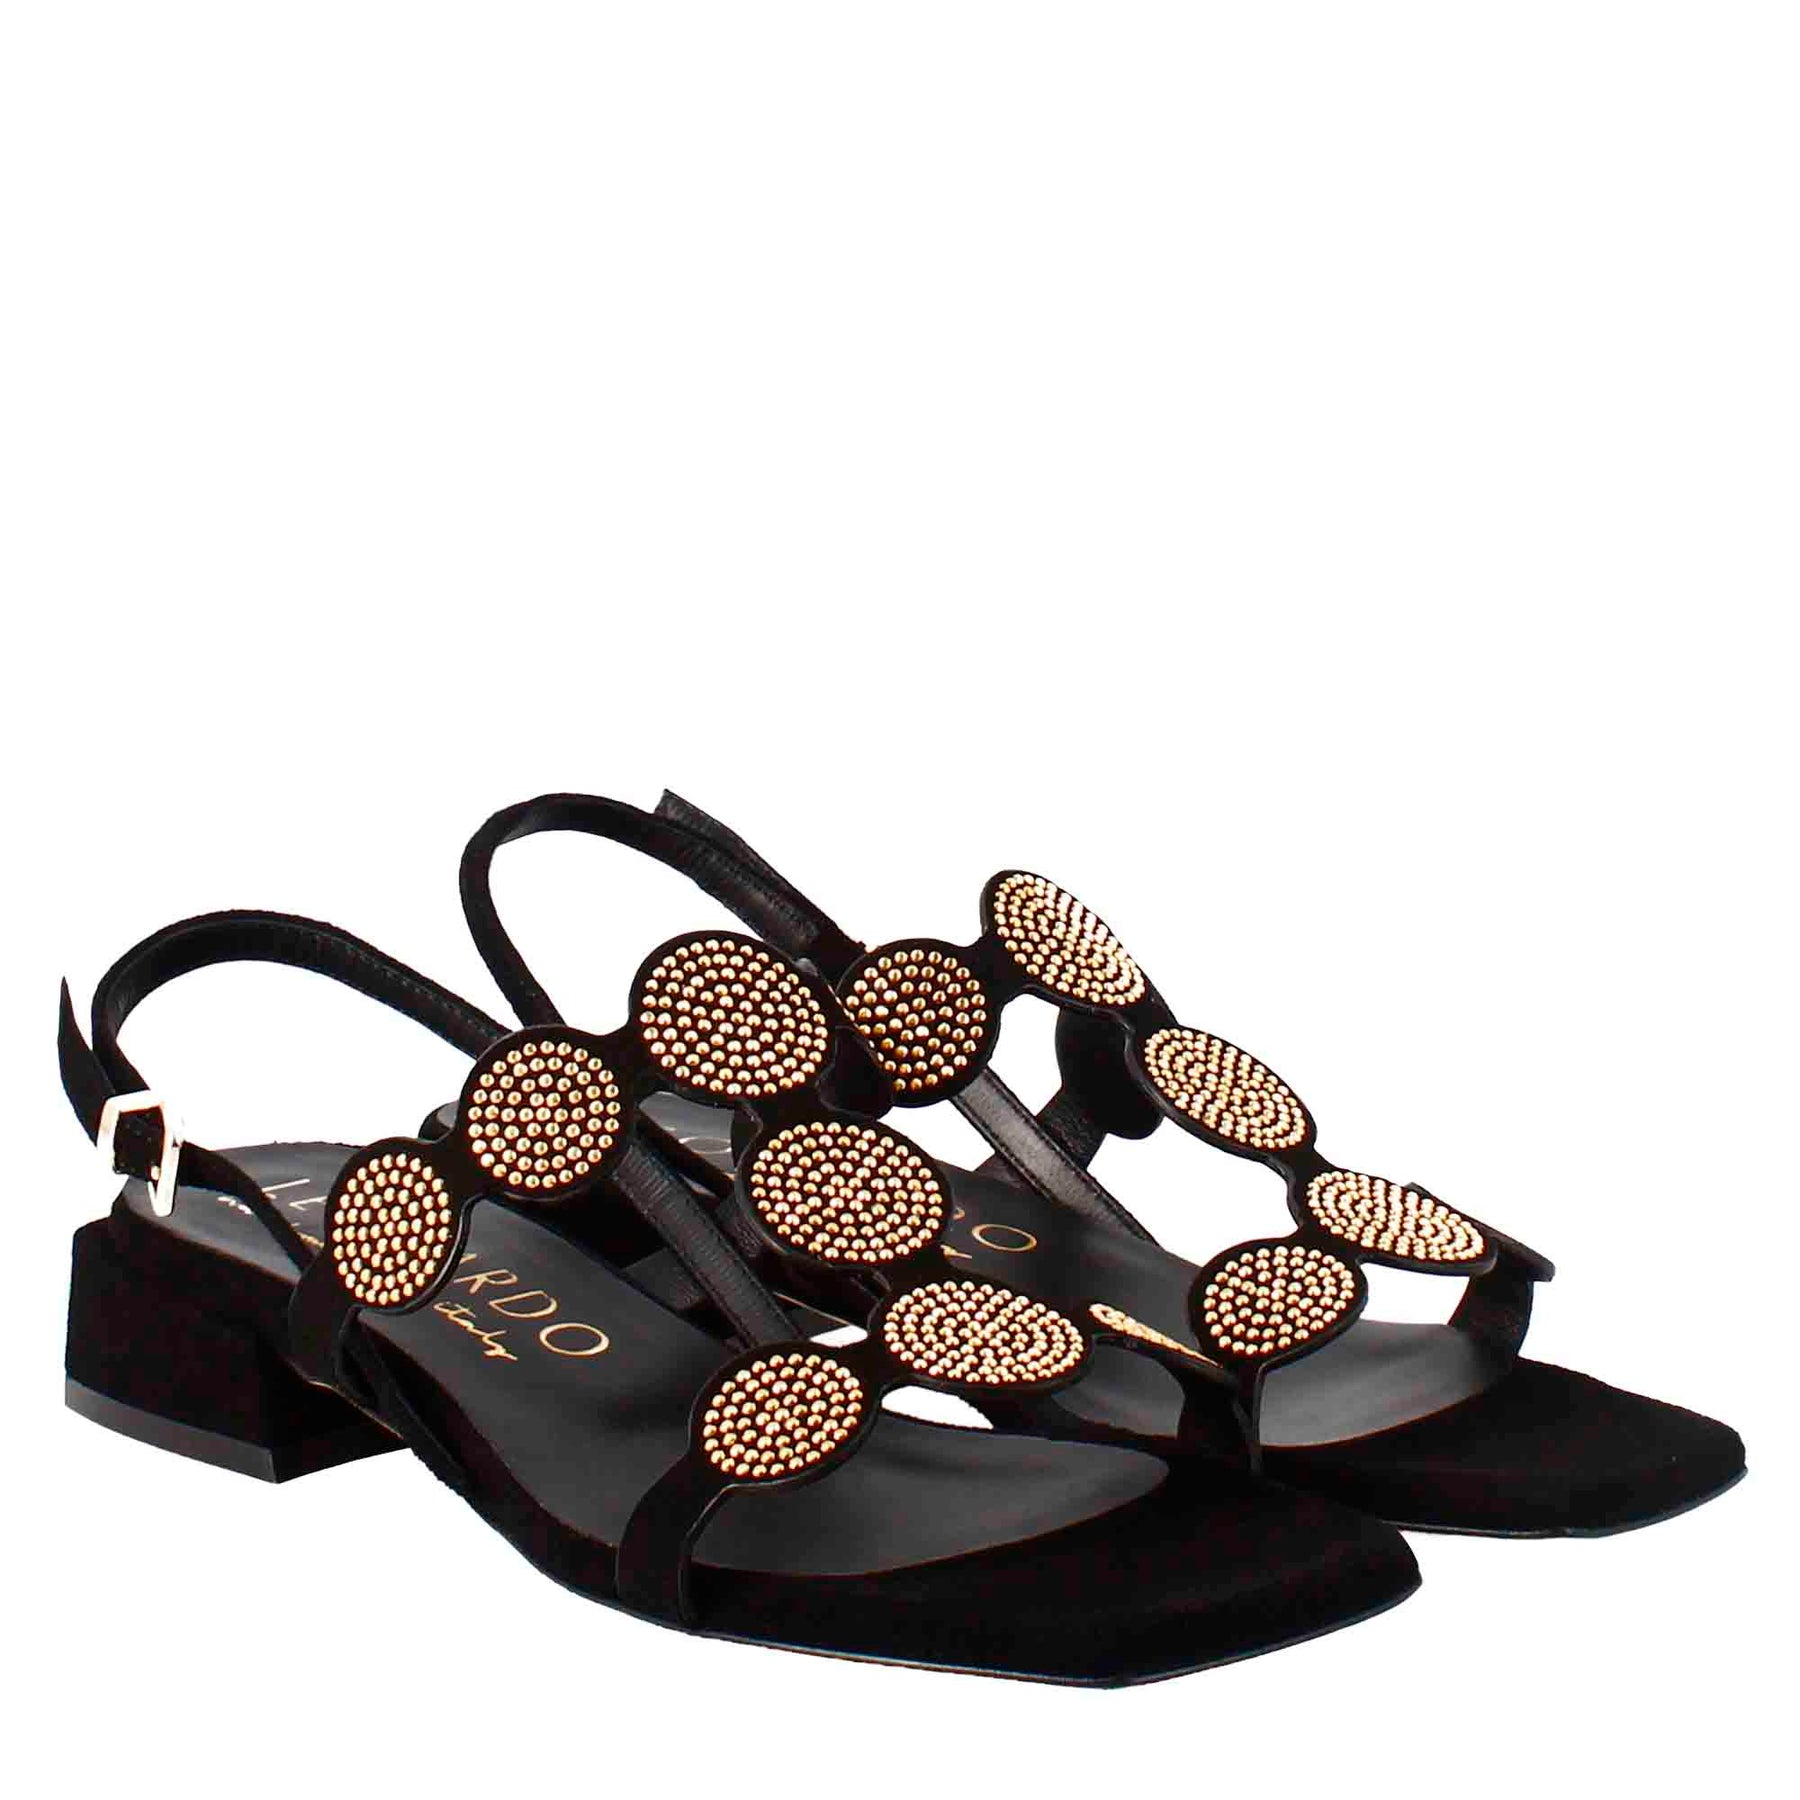 Square-shaped women's sandal in black suede with glitter 